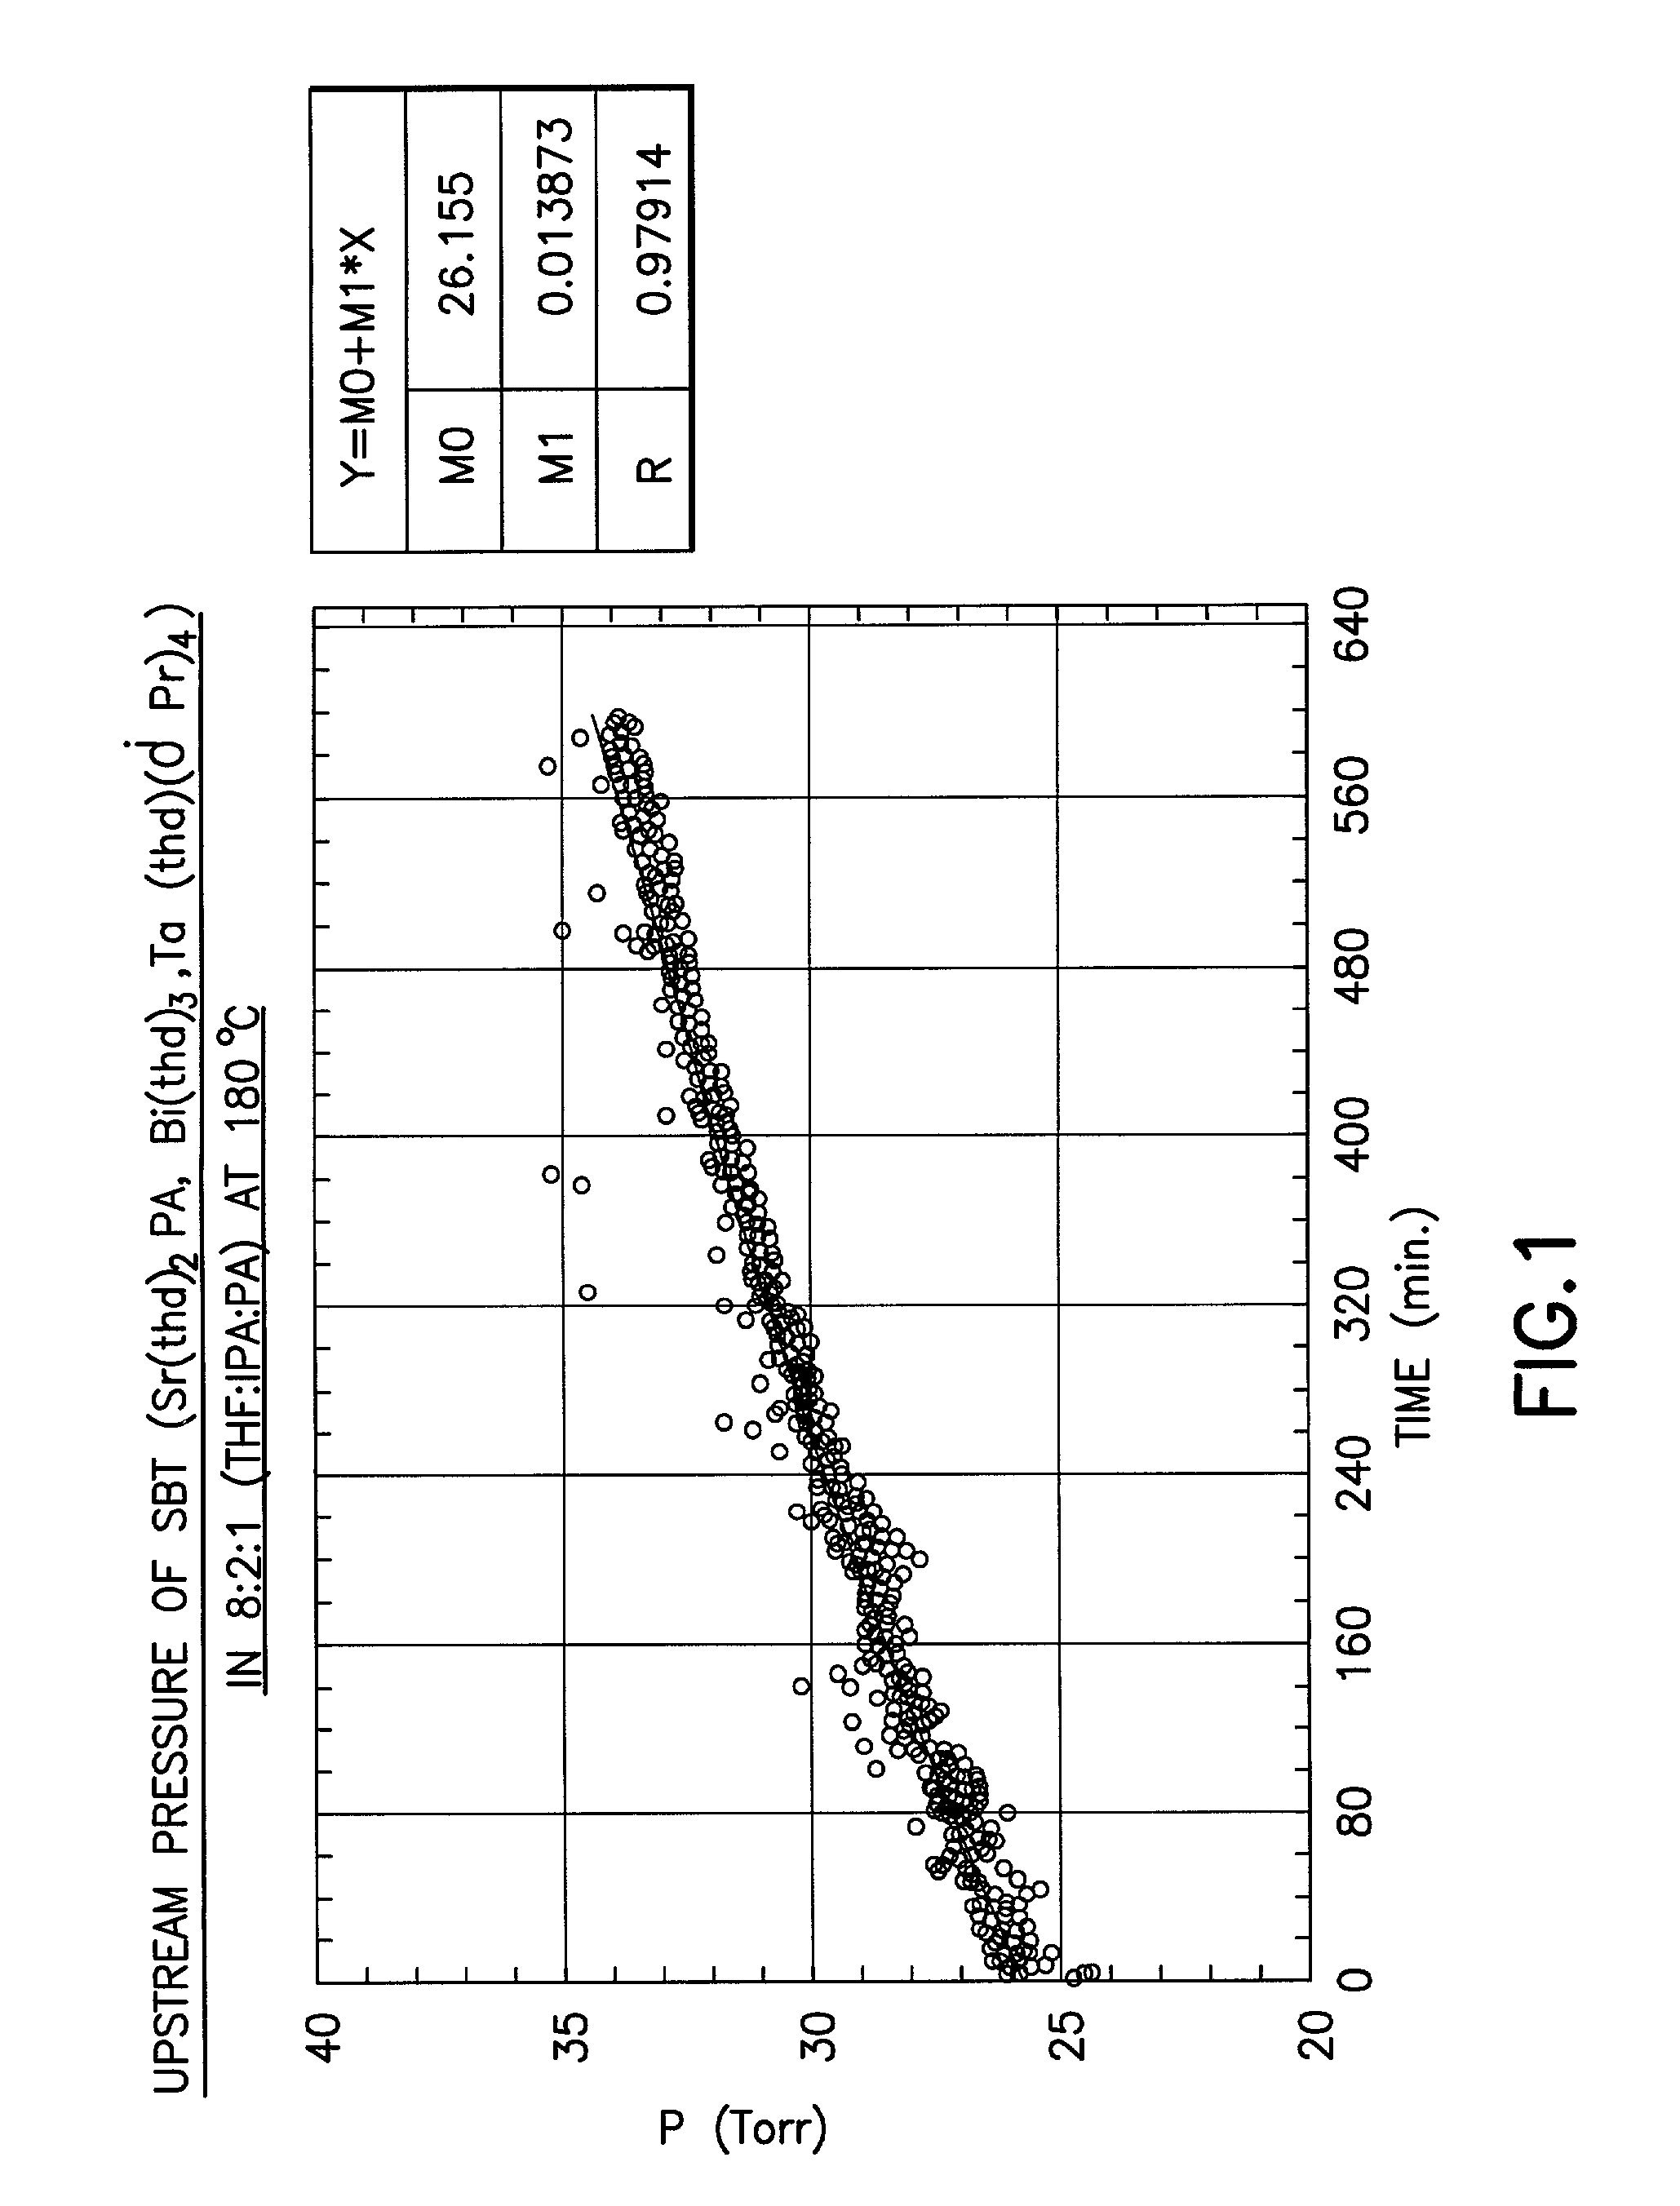 Alkane and polyamine solvent compositions for liquid delivery chemical vapor deposition